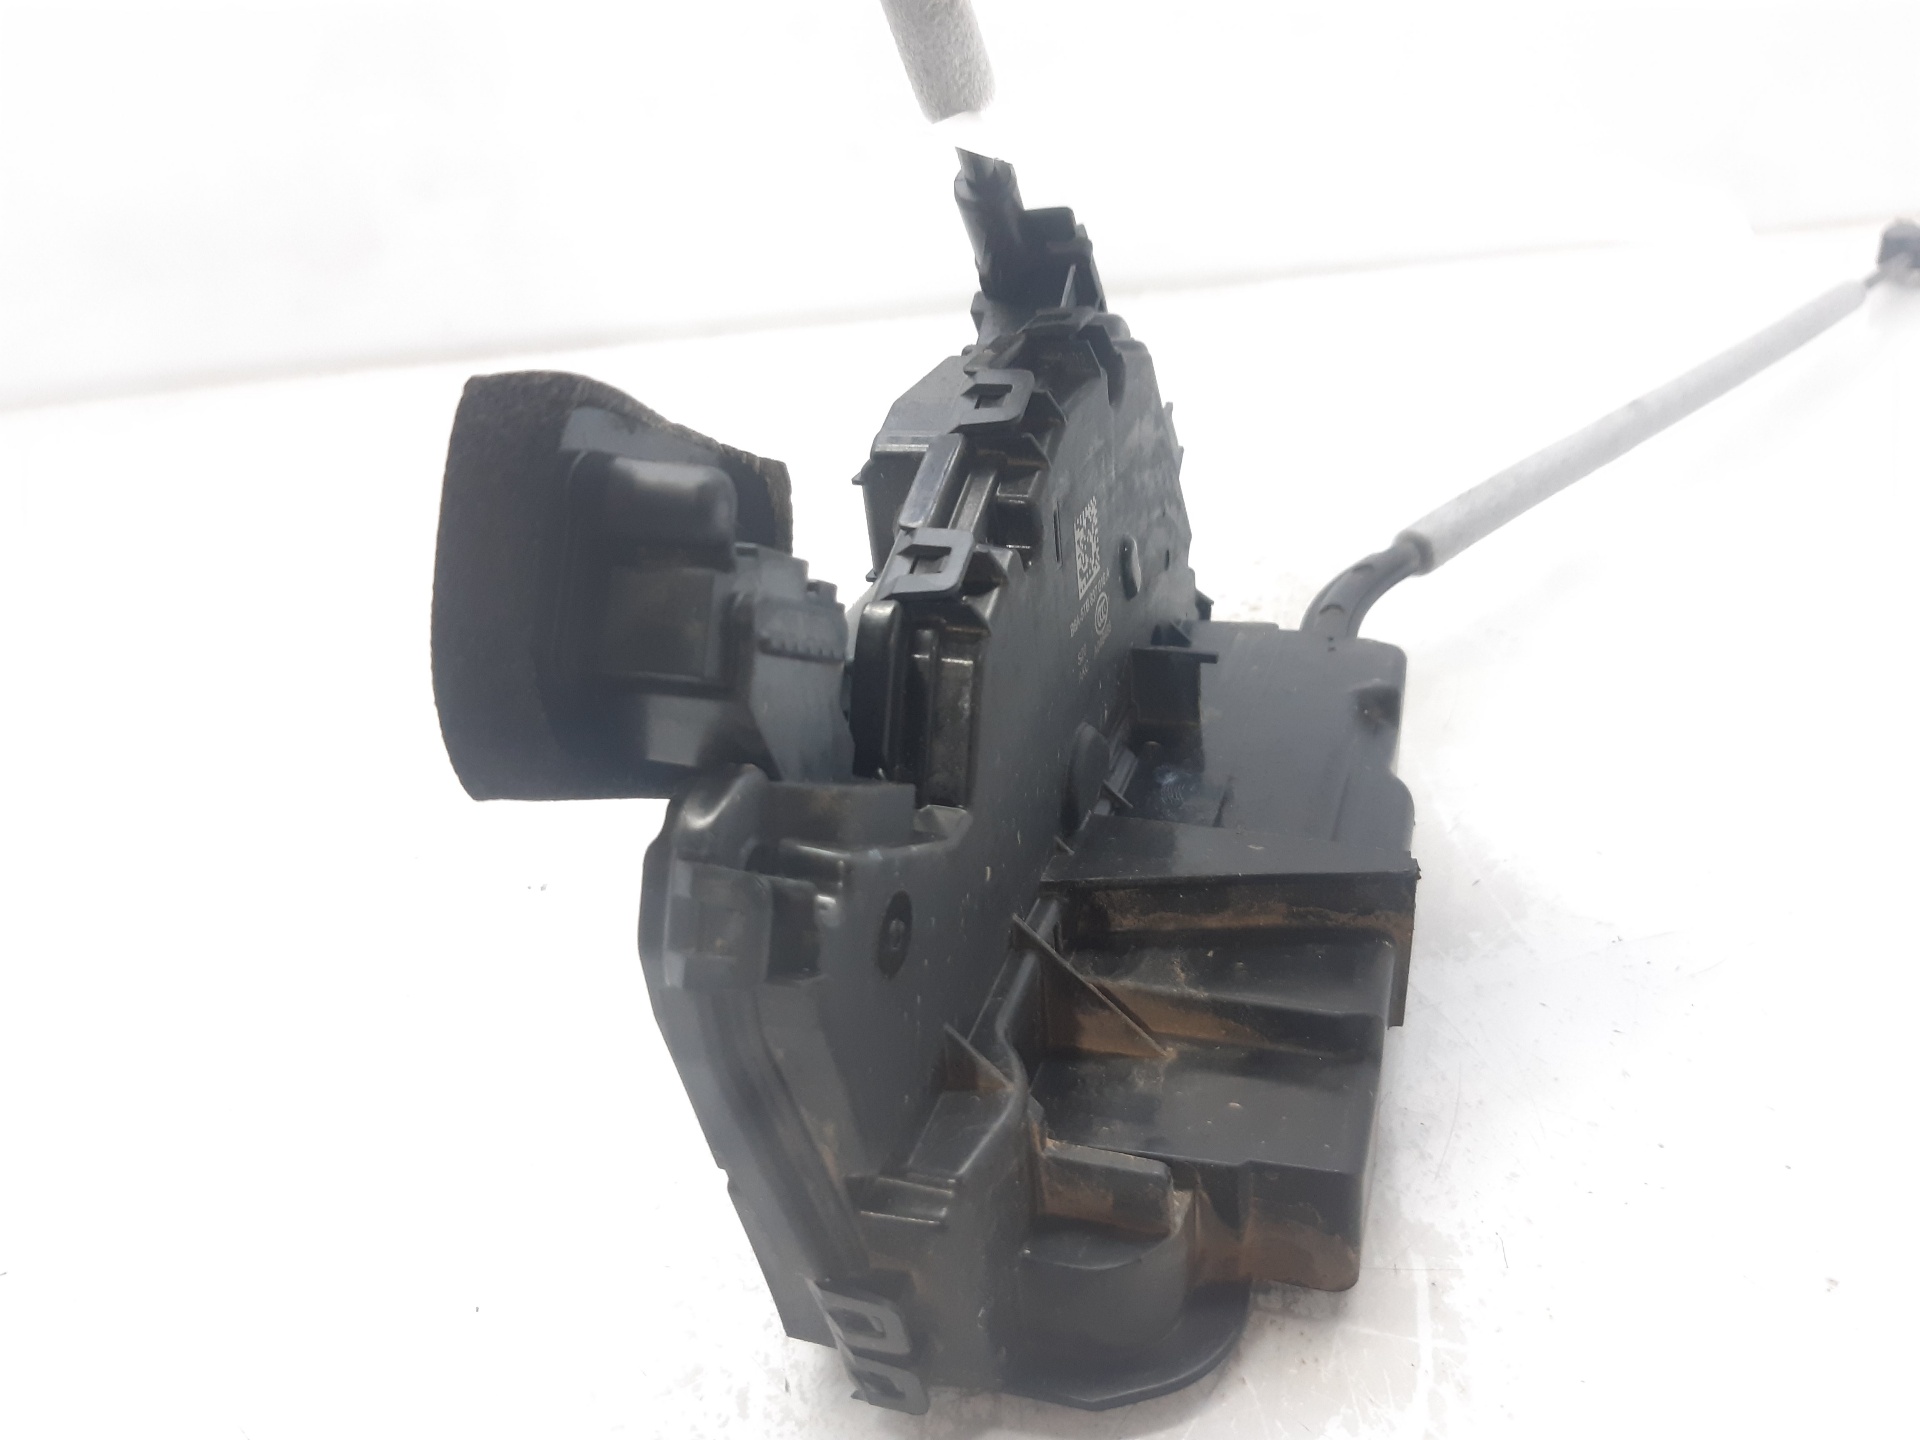 SEAT Alhambra 2 generation (2010-2021) Front Right Door Lock 5TB837016A 22042831